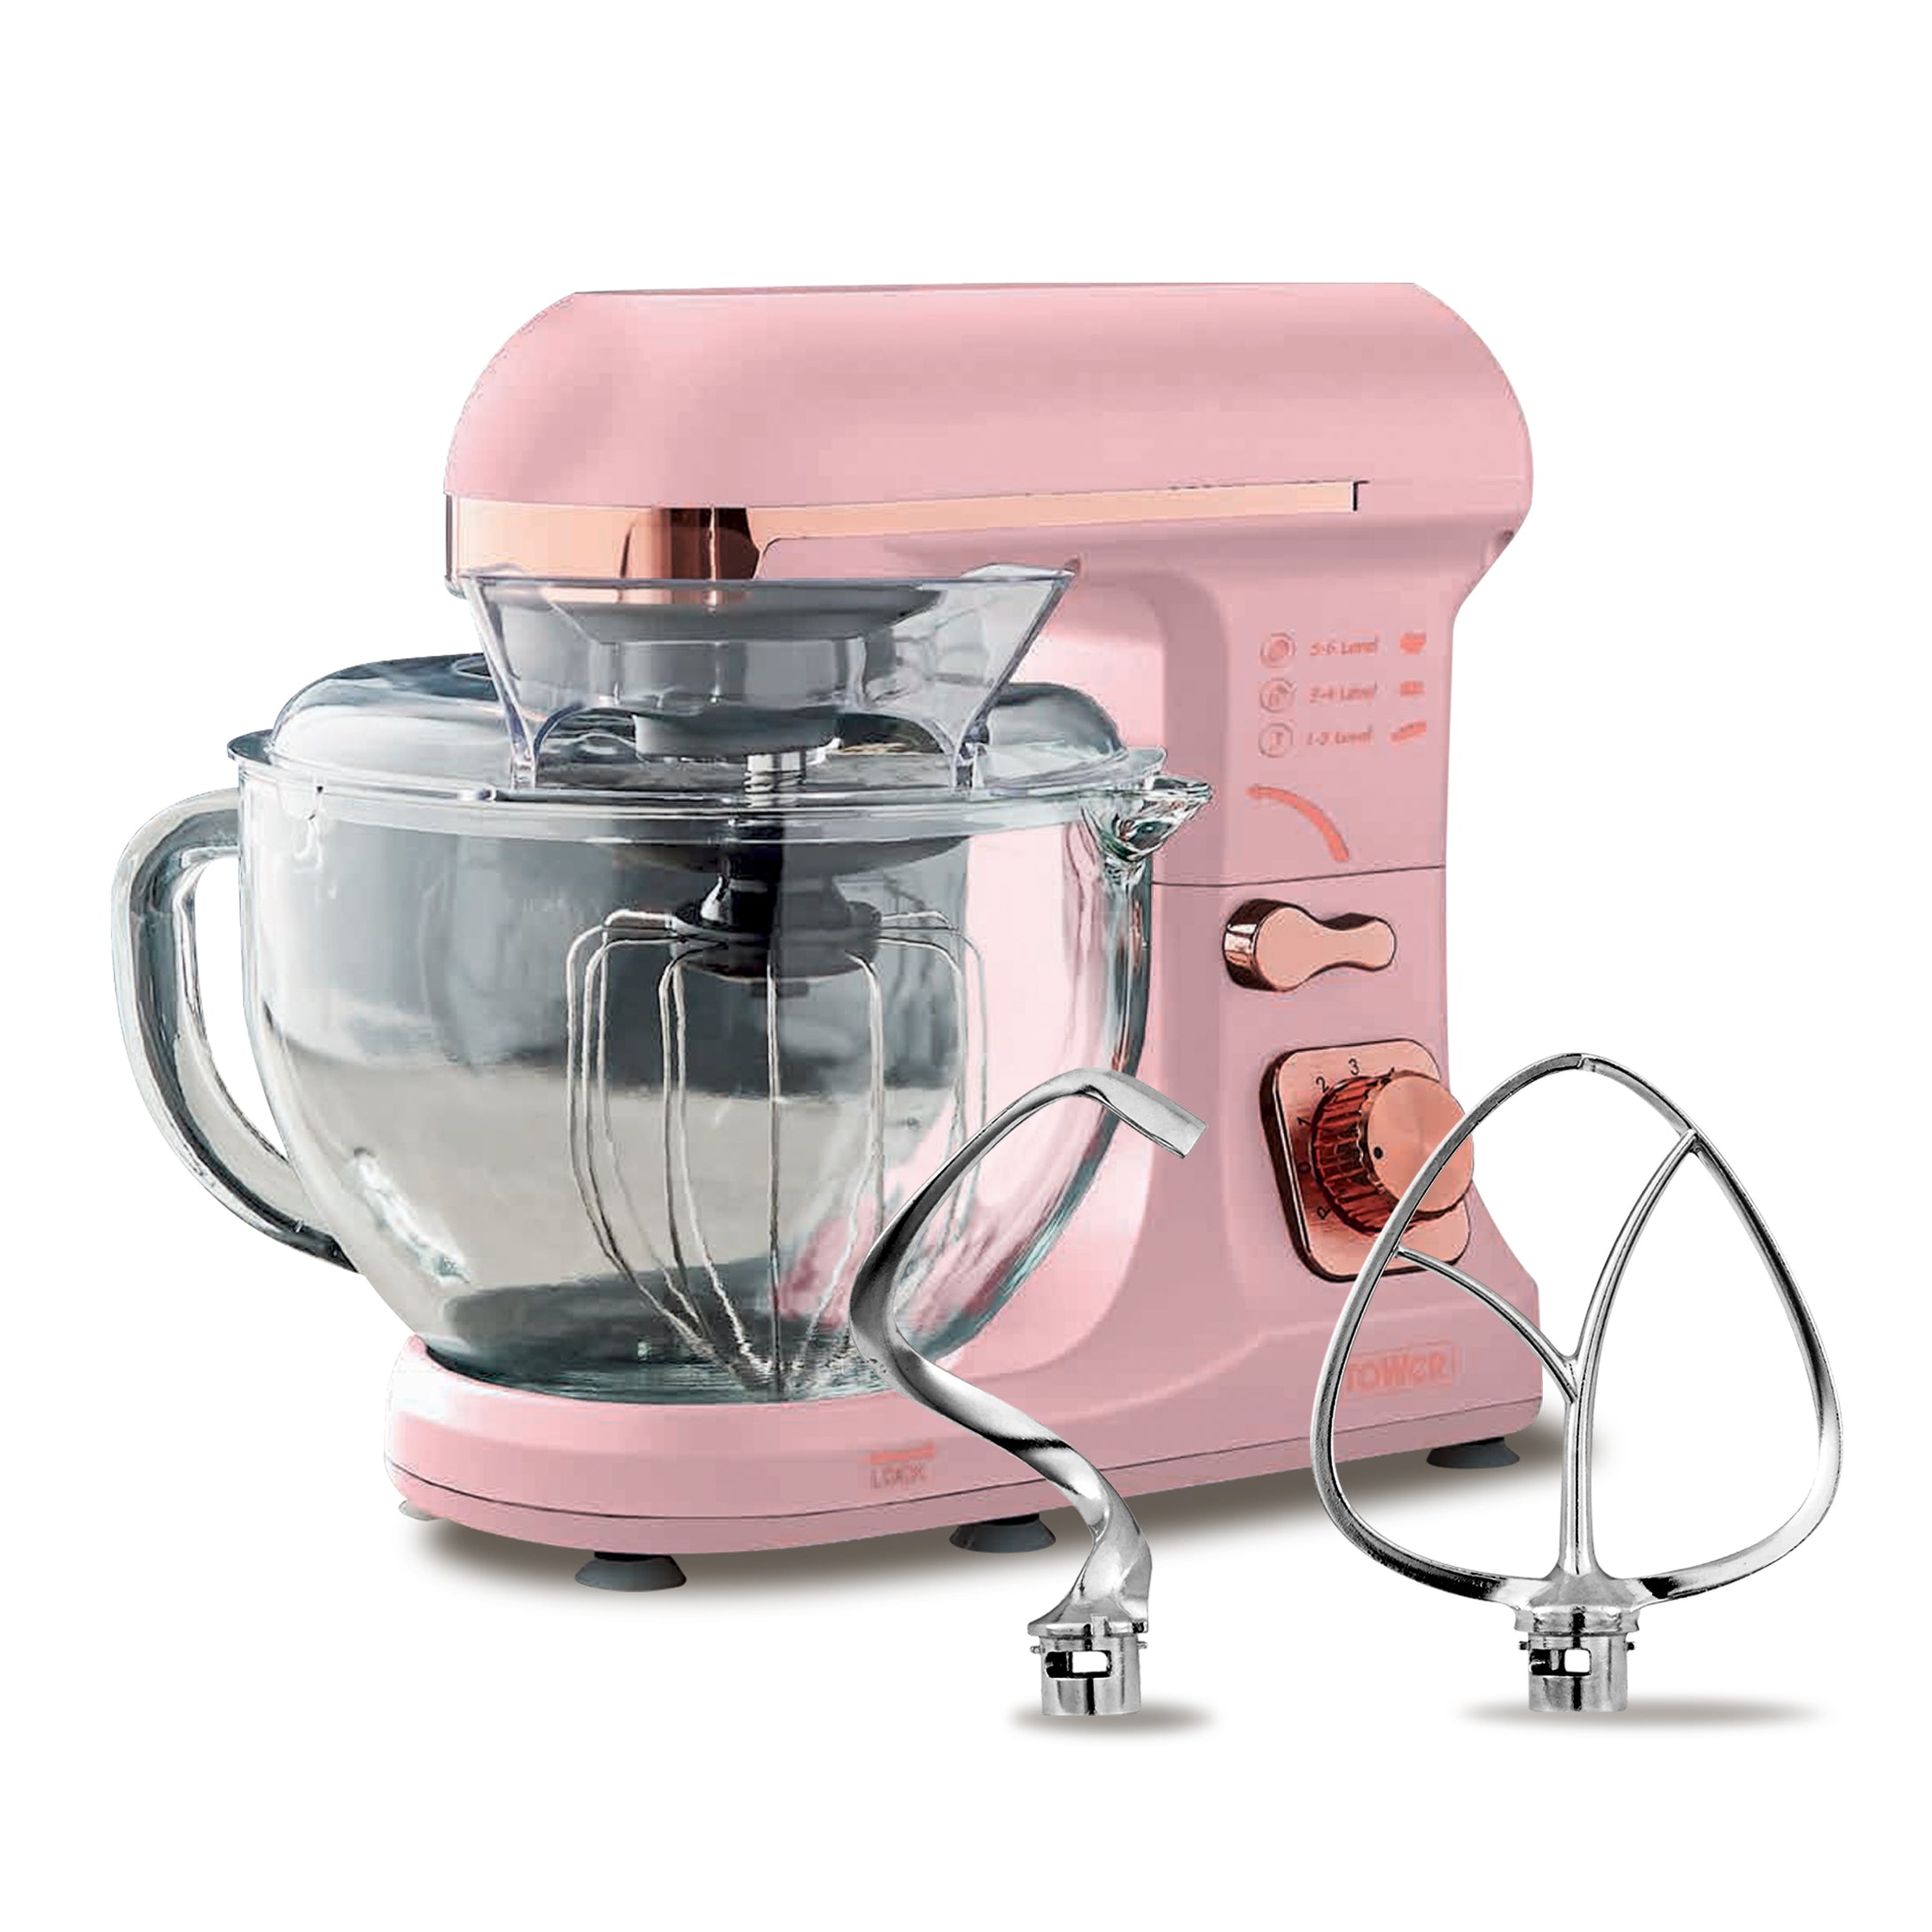 UK Tower Multi-Function Stand Mixer - Pink